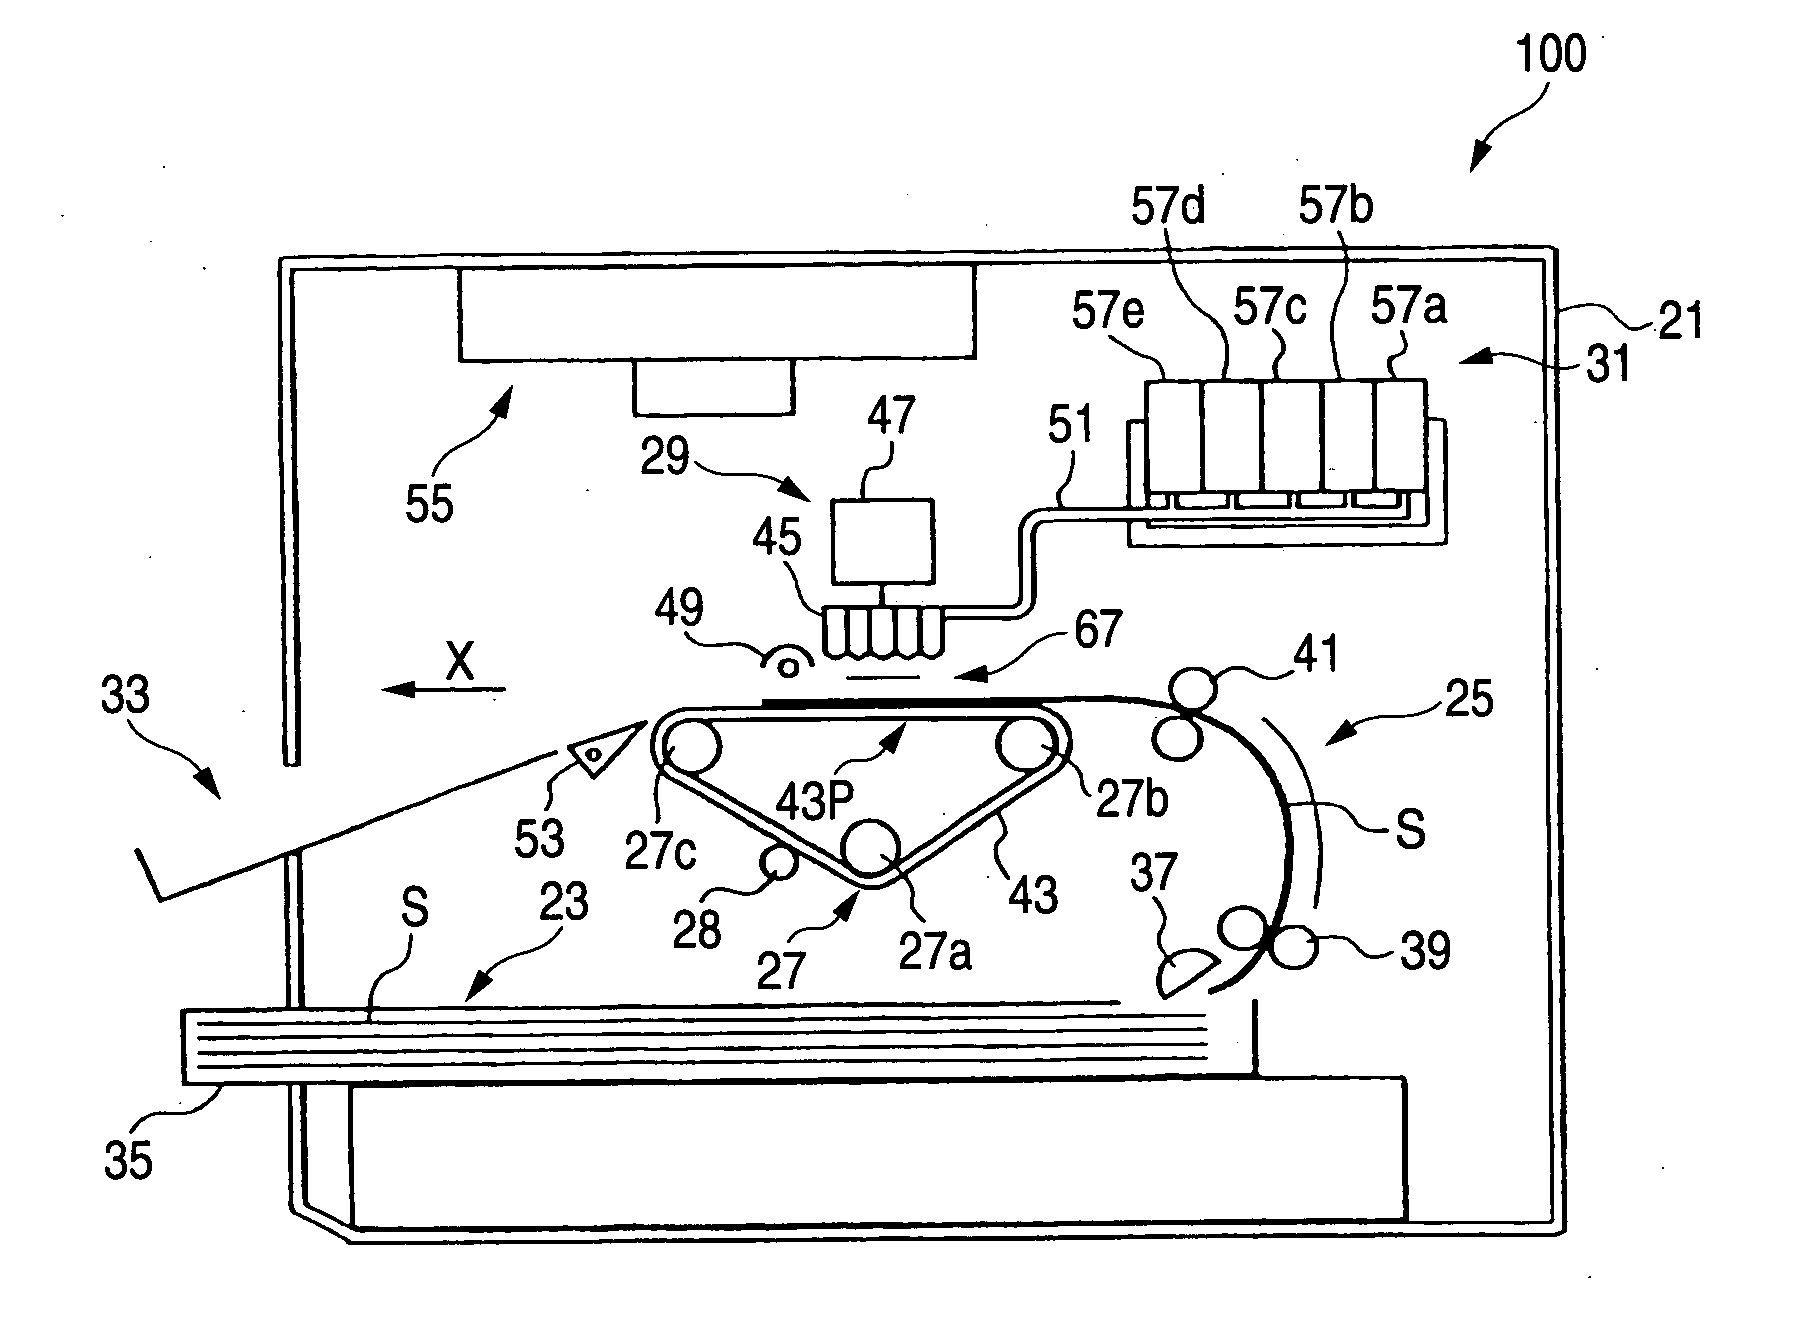 Active energy ray curable inkjet apparatus